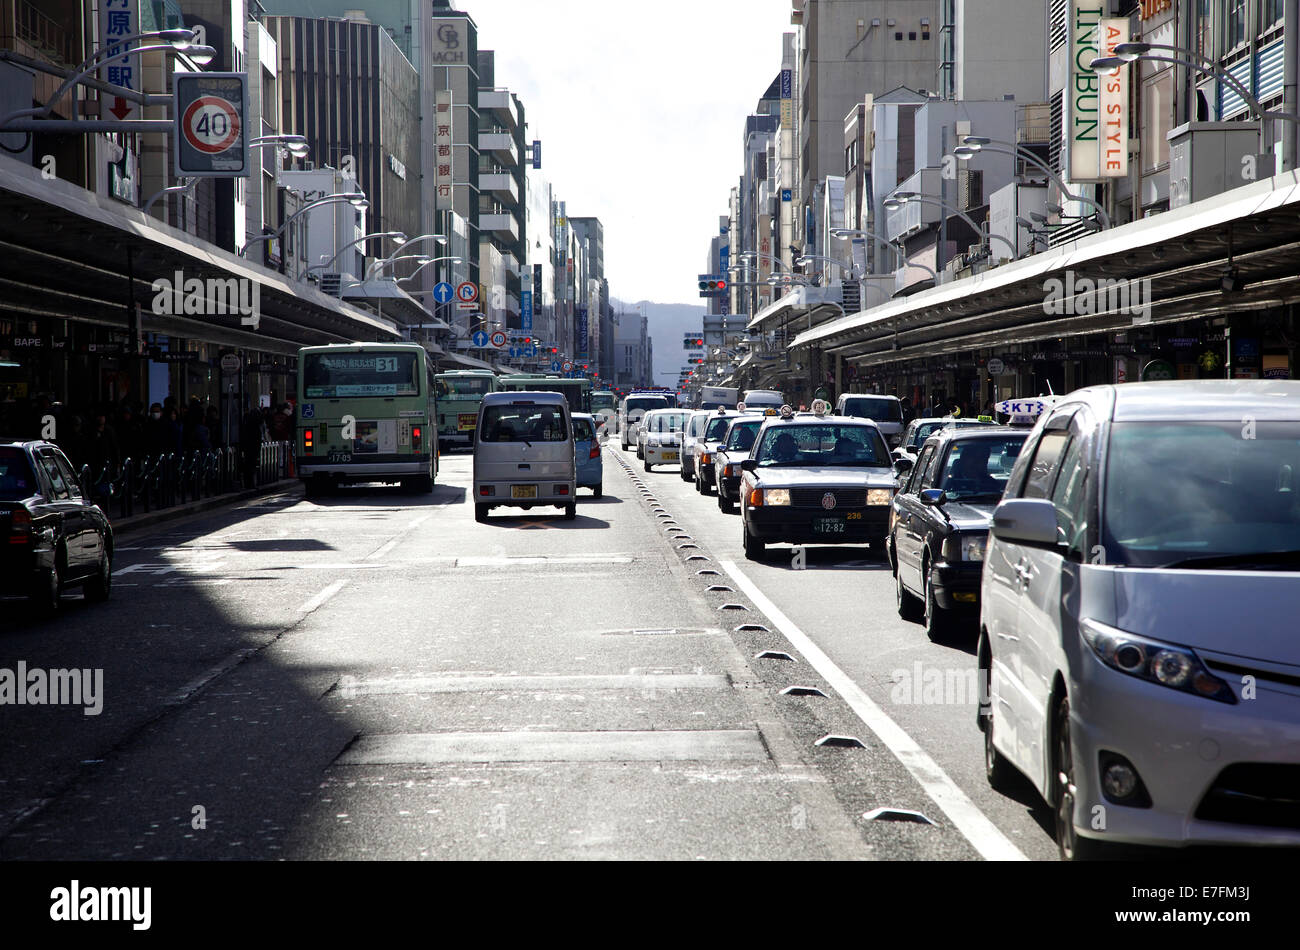 Cars, traffic on the road, red lights in Kawaramachi street, Kyoto, Japan, Asia Stock Photo